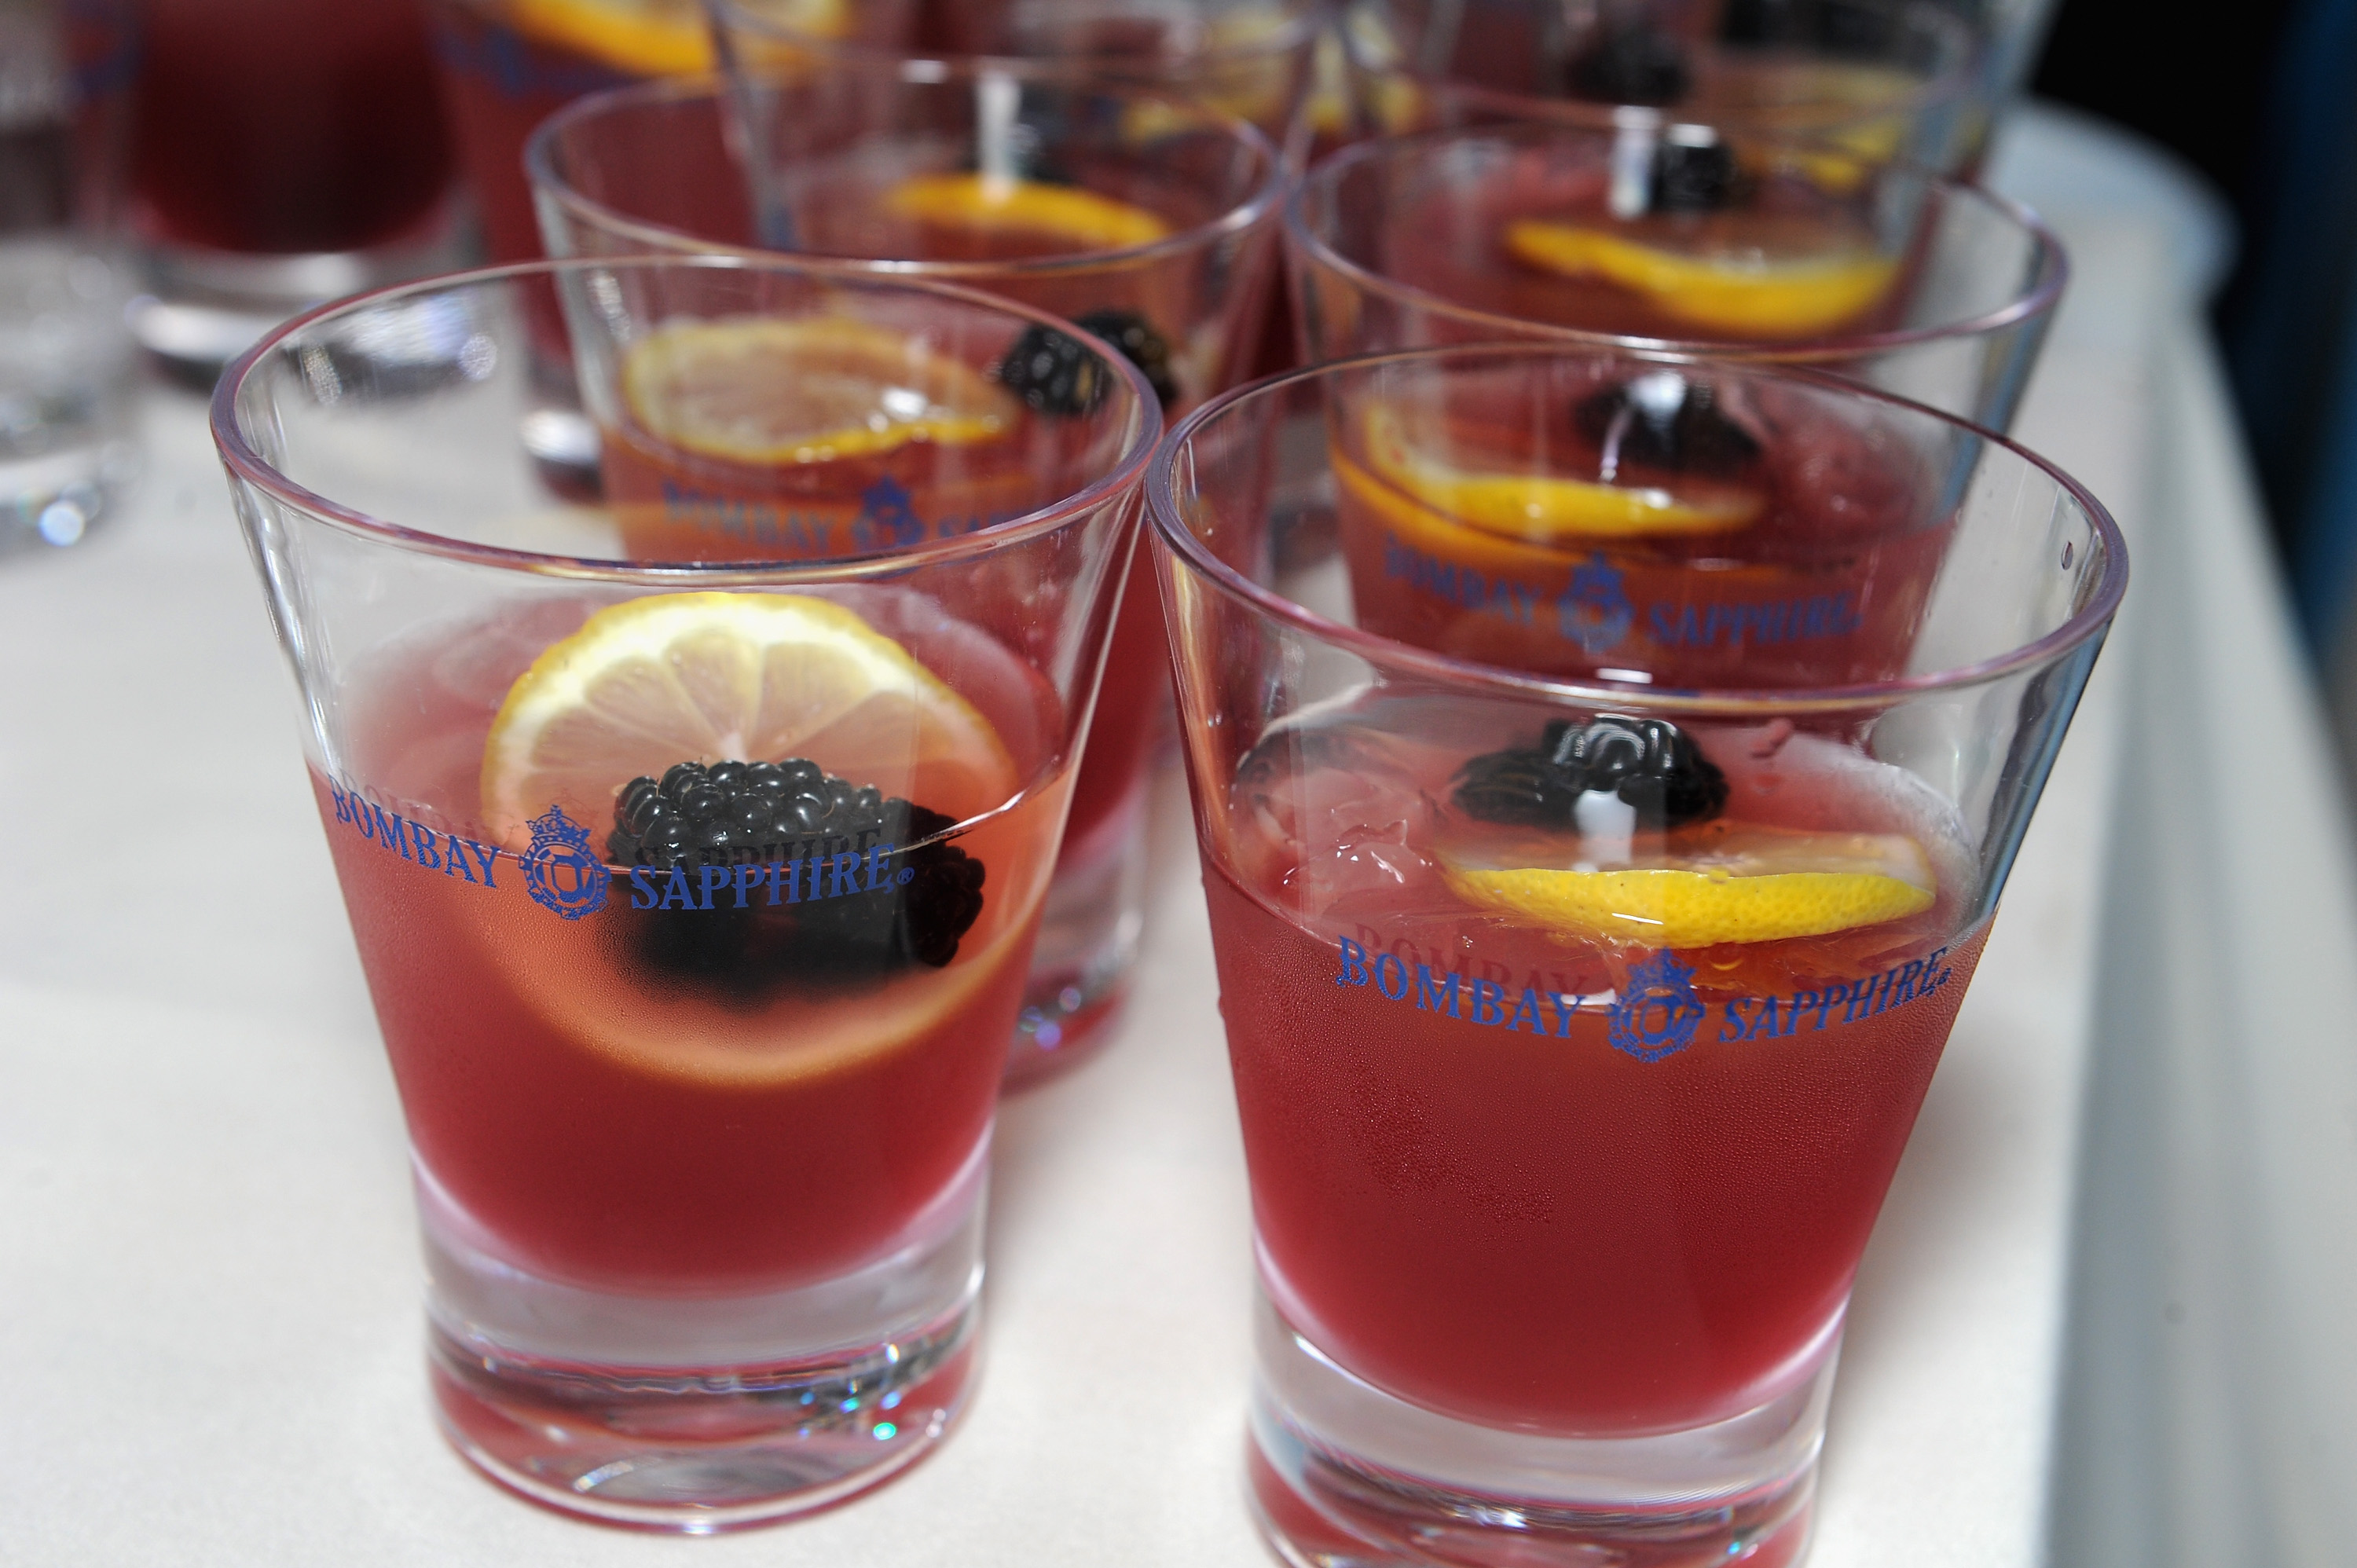 NEW YORK, NY - MAY 03:  A view of the Bombay Sapphire Bramble cocktail celebrating Poppy Delevingne's birthday at Pioneer Works 2nd Annual Village Fete presented by BOMBAY SAPPHIRE GIN at Pioneer Works Center for Art + Innovation on May 3, 2015 in New York City.  (Photo by Craig Barritt/Getty Images for BOMBAY SAPPHIRE GIN)